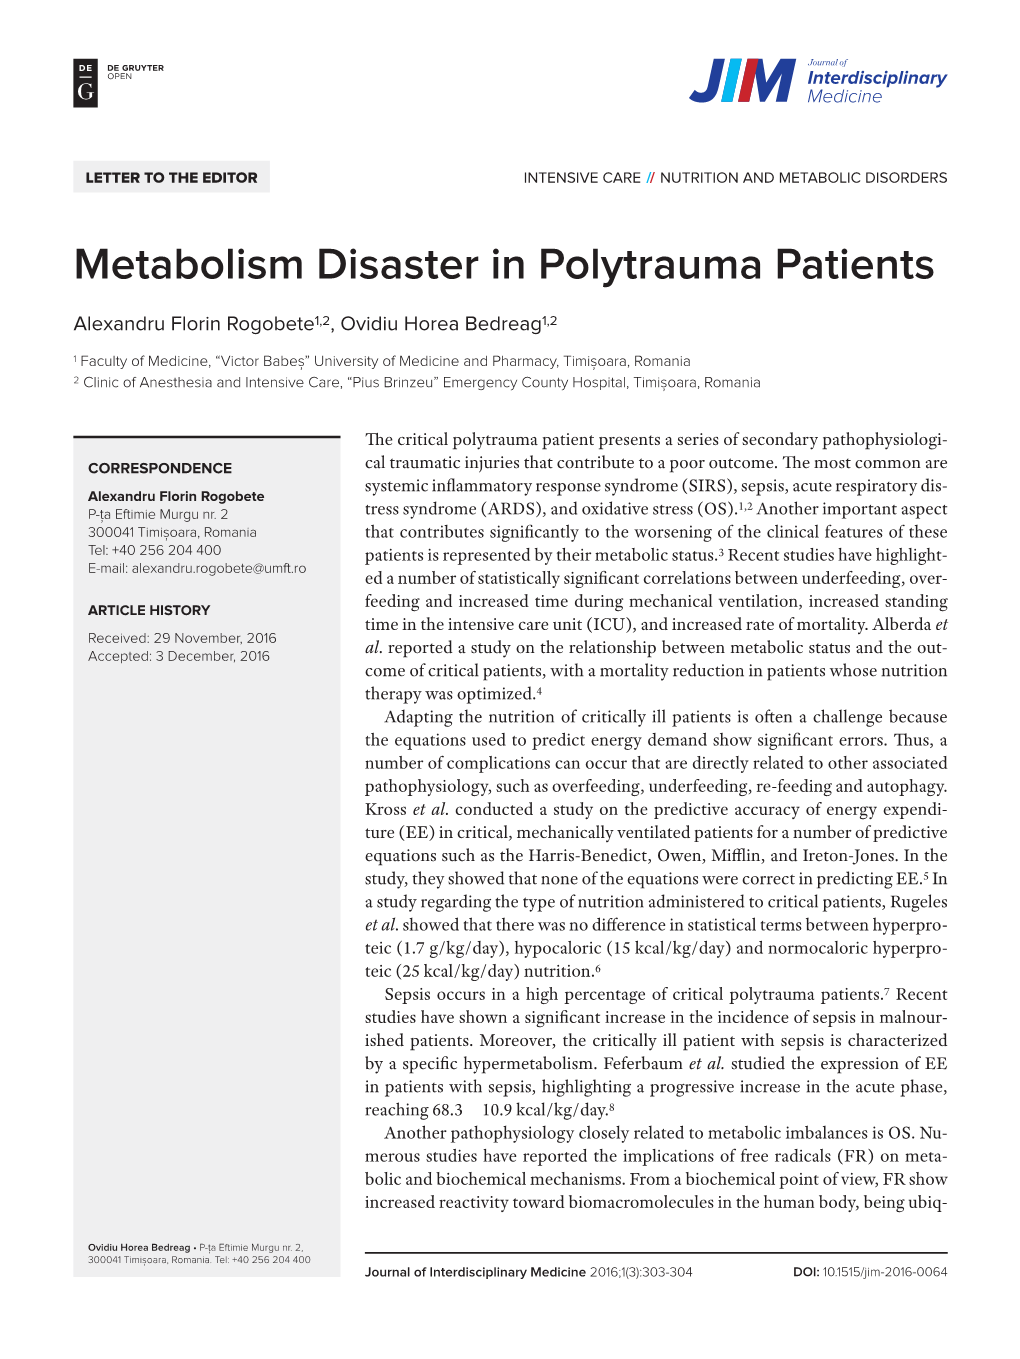 Metabolism Disaster in Polytrauma Patients